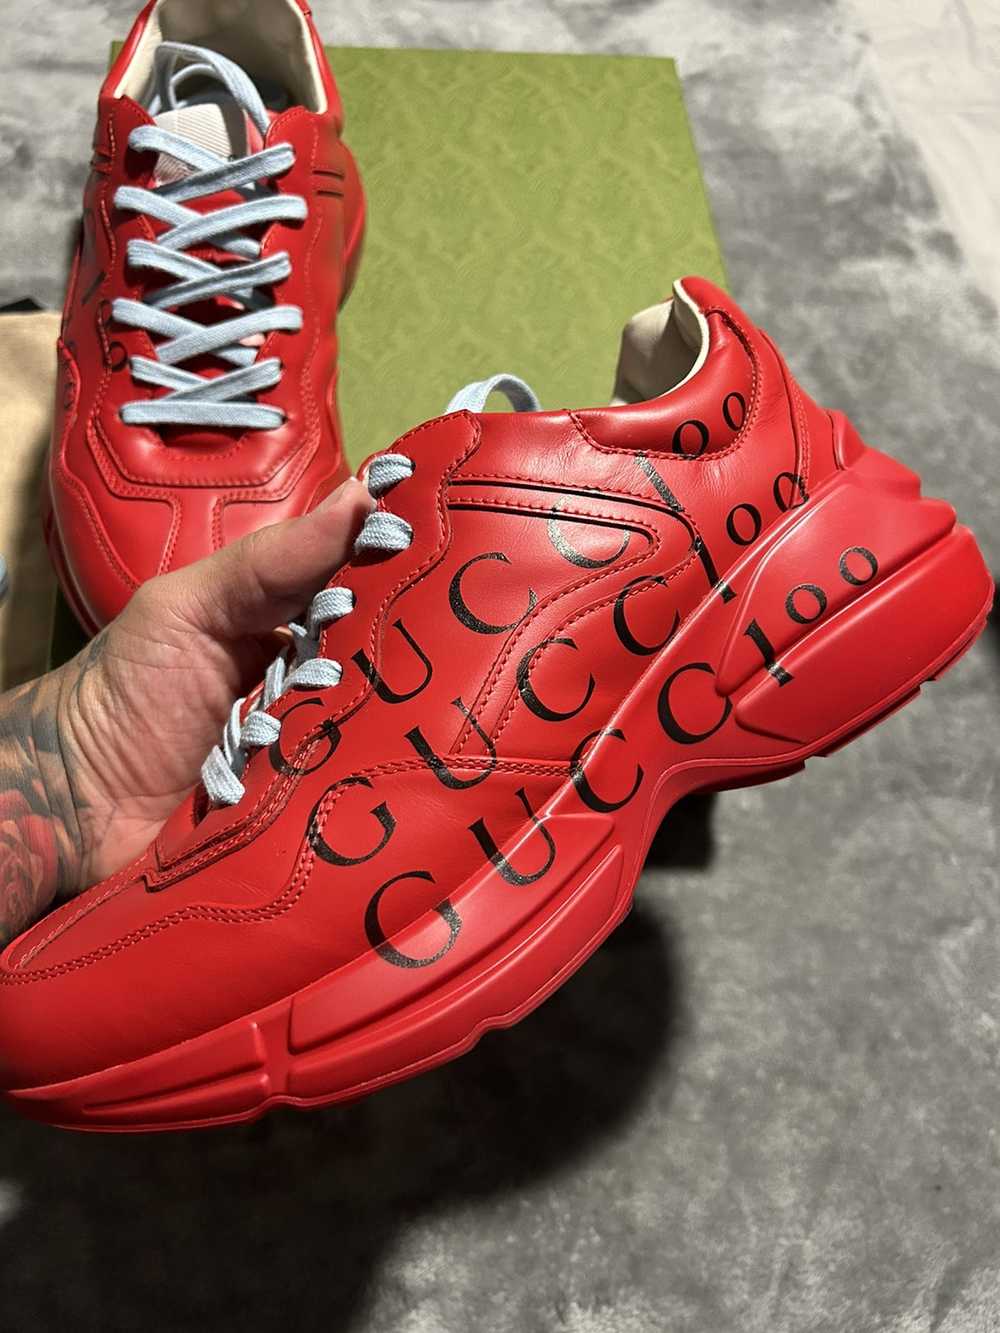 Gucci Gucci 100 Rython sneakers - image 6